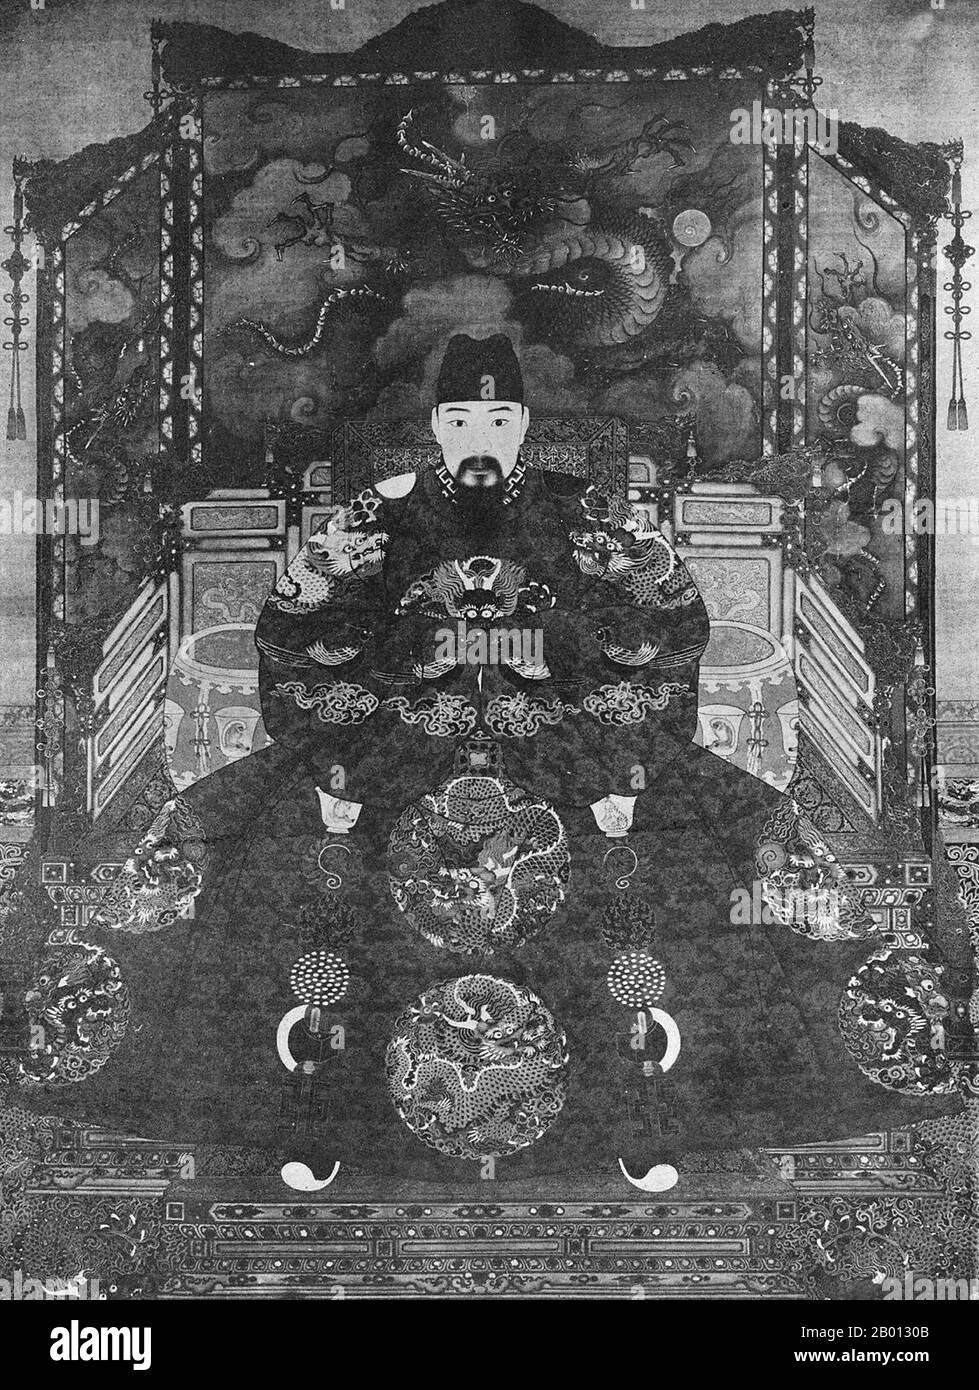 China: Emperor Hongzhi (30 July 1470 - 9 June 1505), 10th ruler of the Ming Dynasty (r. 1487-1505). Hanging scroll painting, 15th-17th century.  The Hongzhi Emperor (1470-1505), personal name Zhu Youcheng and temple name Xiaozong, was 10th emperor of the Ming Dynasty. The son of the Chenghua Emperor, his reign as emperor is called the Hongzhi Silver Age. His era name means 'Great Government'. He was a wise and peace-loving ruler, considered to be one of the greatest Ming emperors. Hongzhi took only one empress and had no concubine. He remains the sole monogamous emperor in Chinese history. Stock Photo